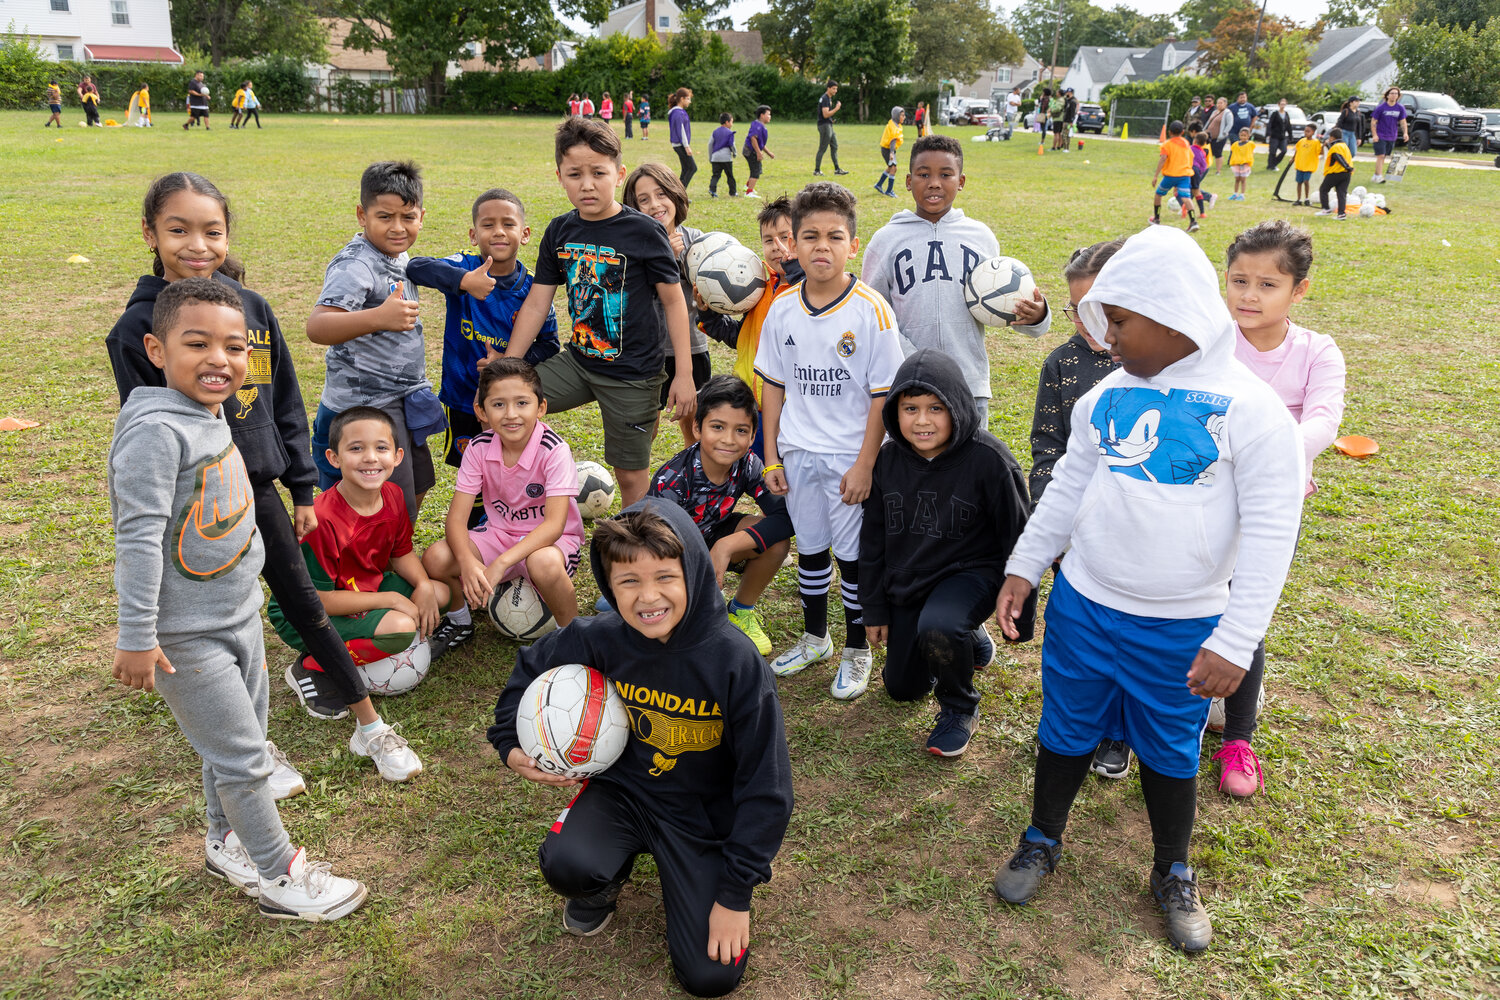 A group of young soccer stars participating in last Saturday’s third annual Soccer Jamboree, hosted by the Uniondale school district.